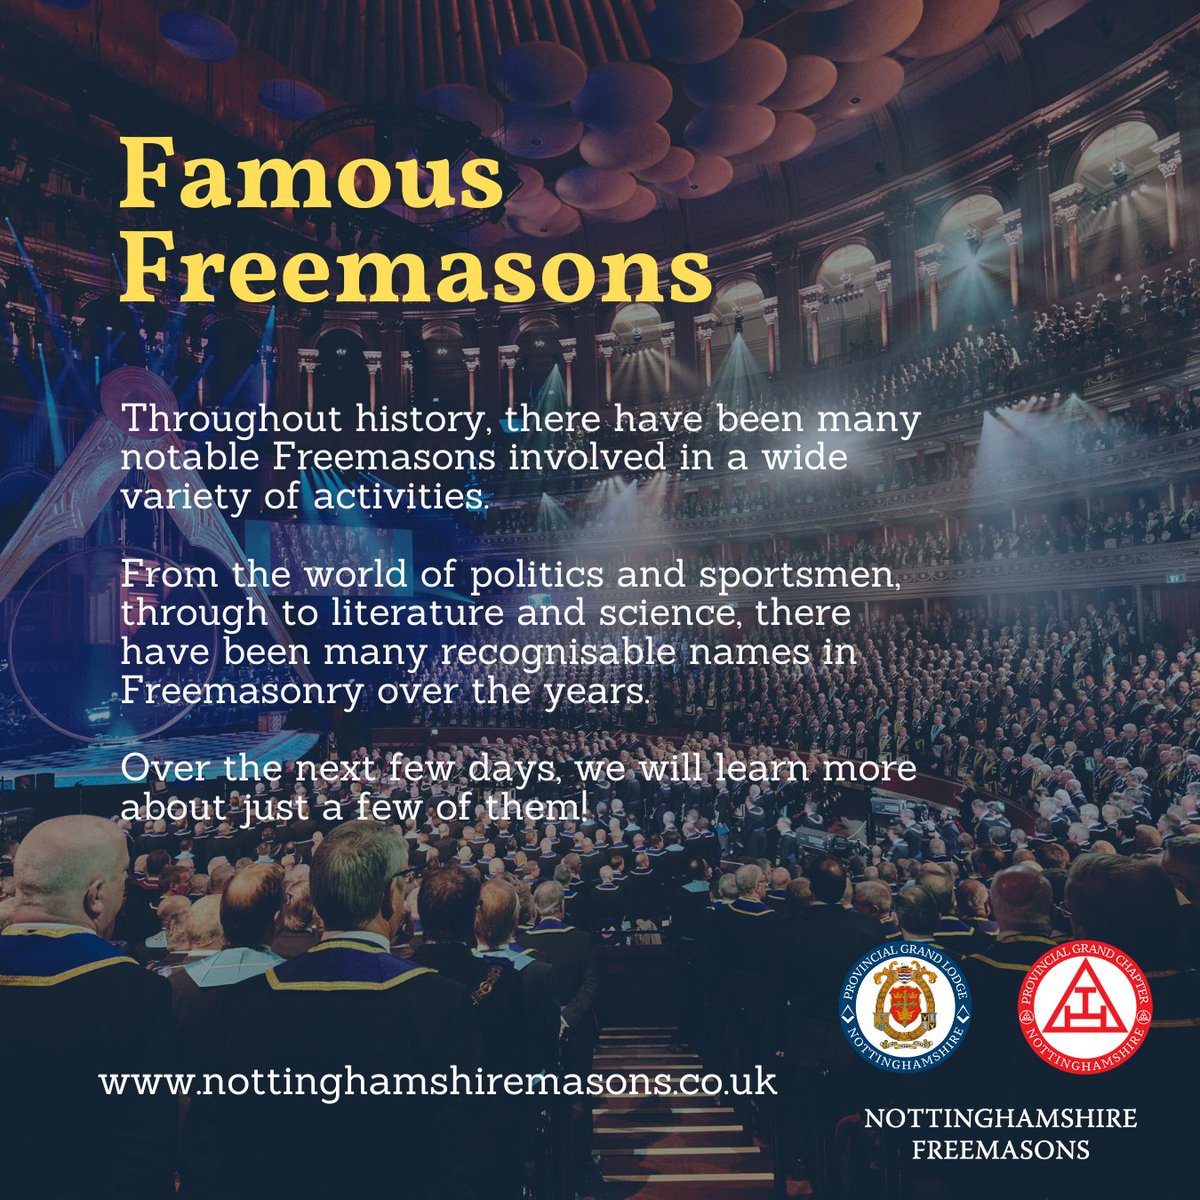 Throughout history, there have been many notable Freemasons involved in a wide variety of activities. Over the next few days we will share just some of those 'Famous Freemasons' and their journeys in Freemasonry. #Freemasons